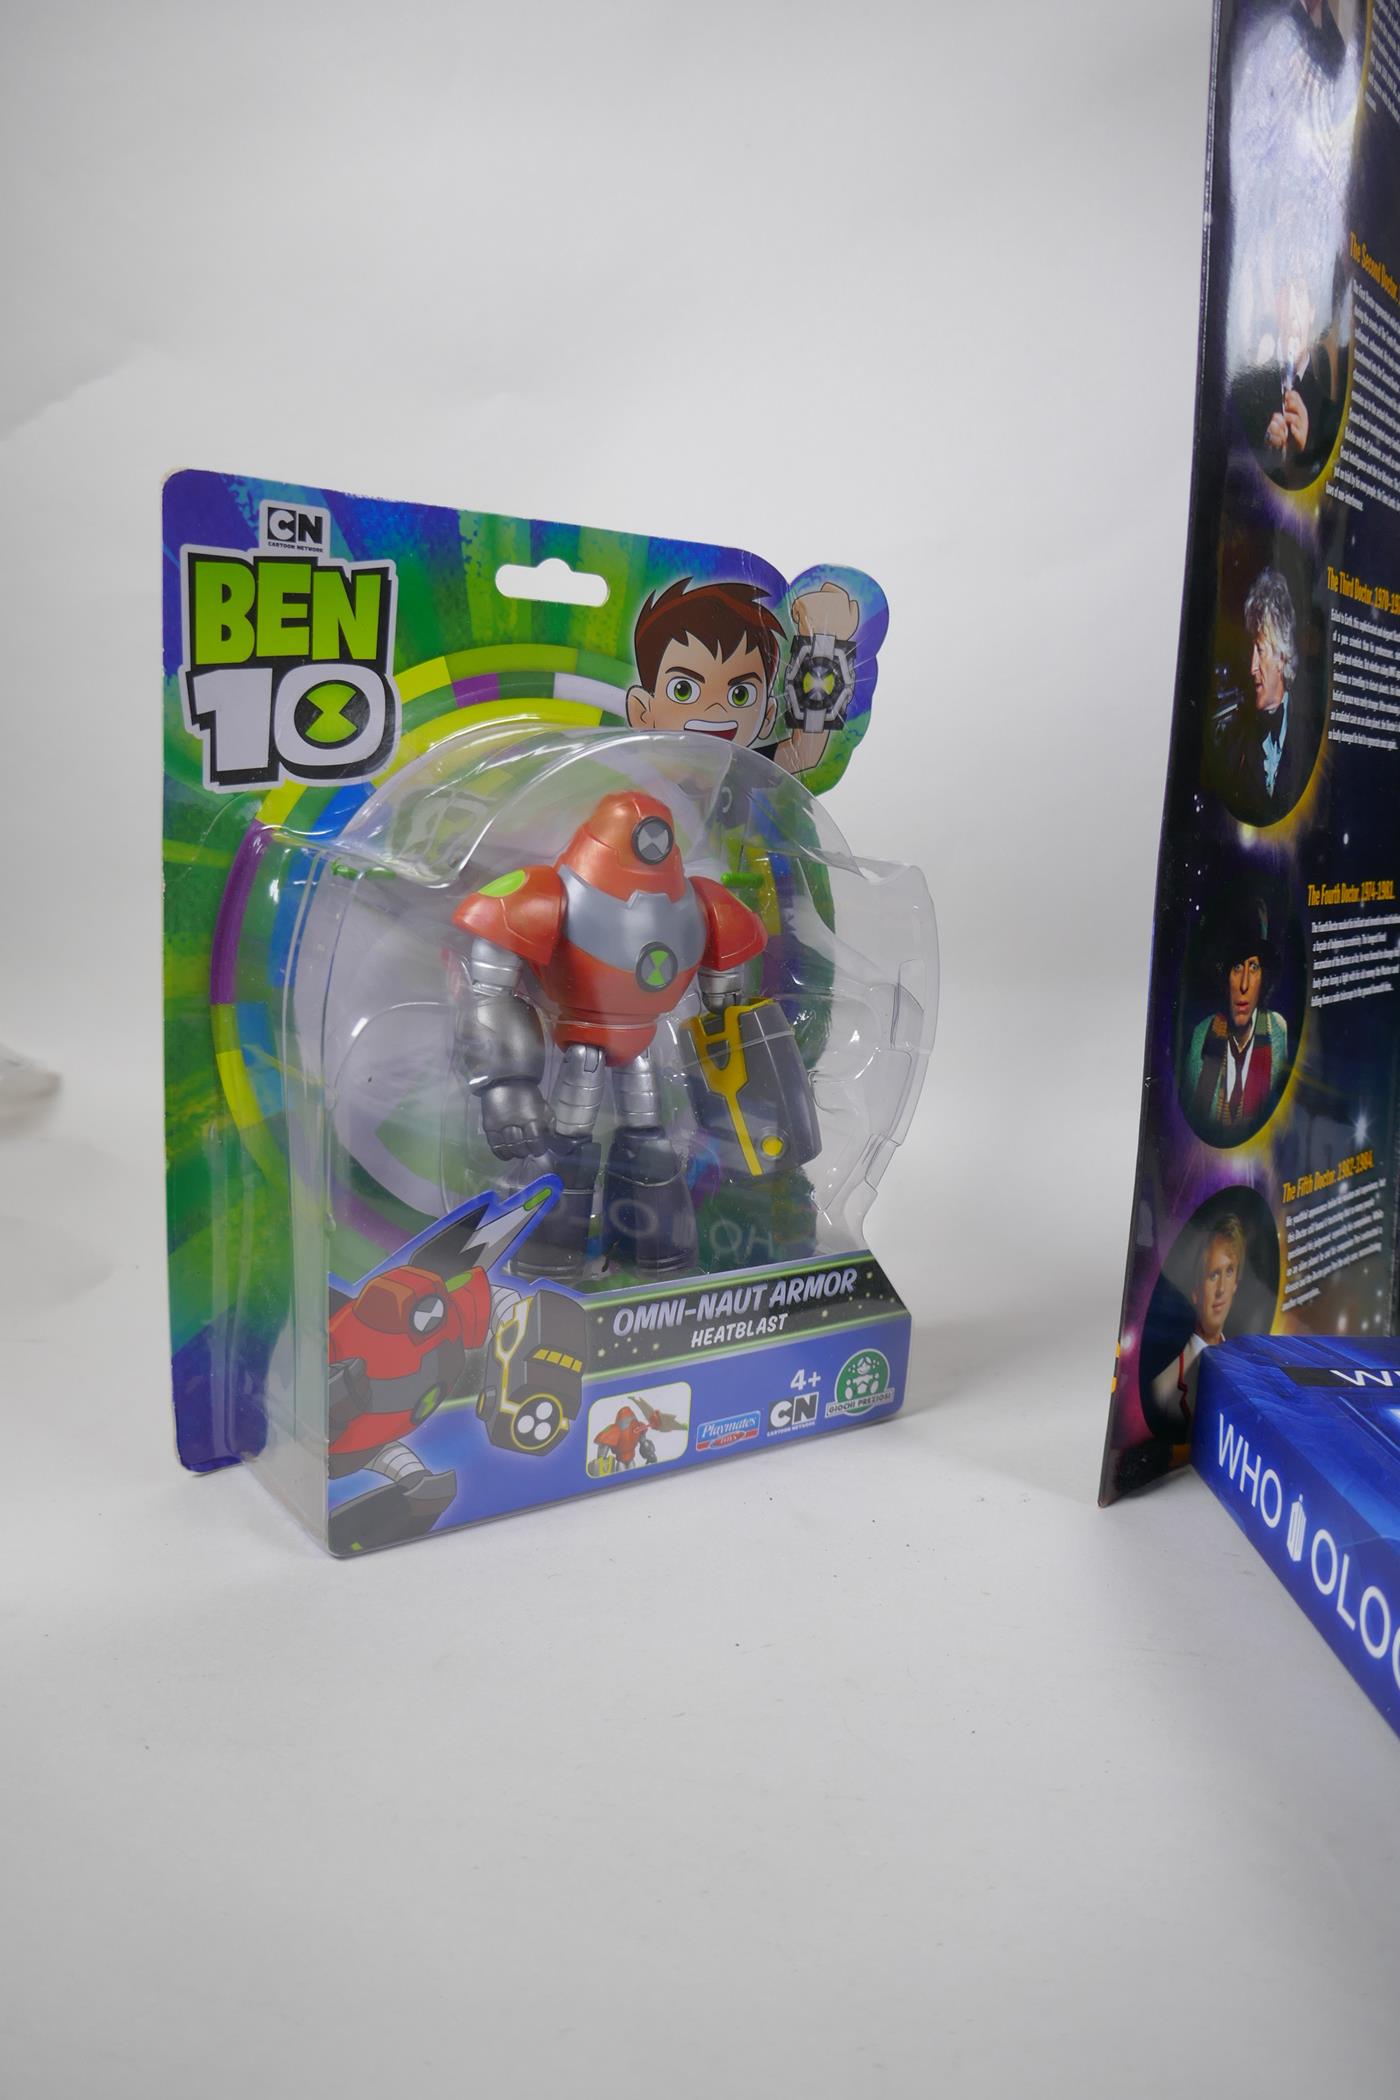 Dr Who Eleven Doctors figure set, Who-ology book, 13th Doctor adventure doll, Ben 10 omni-naut- - Image 4 of 6